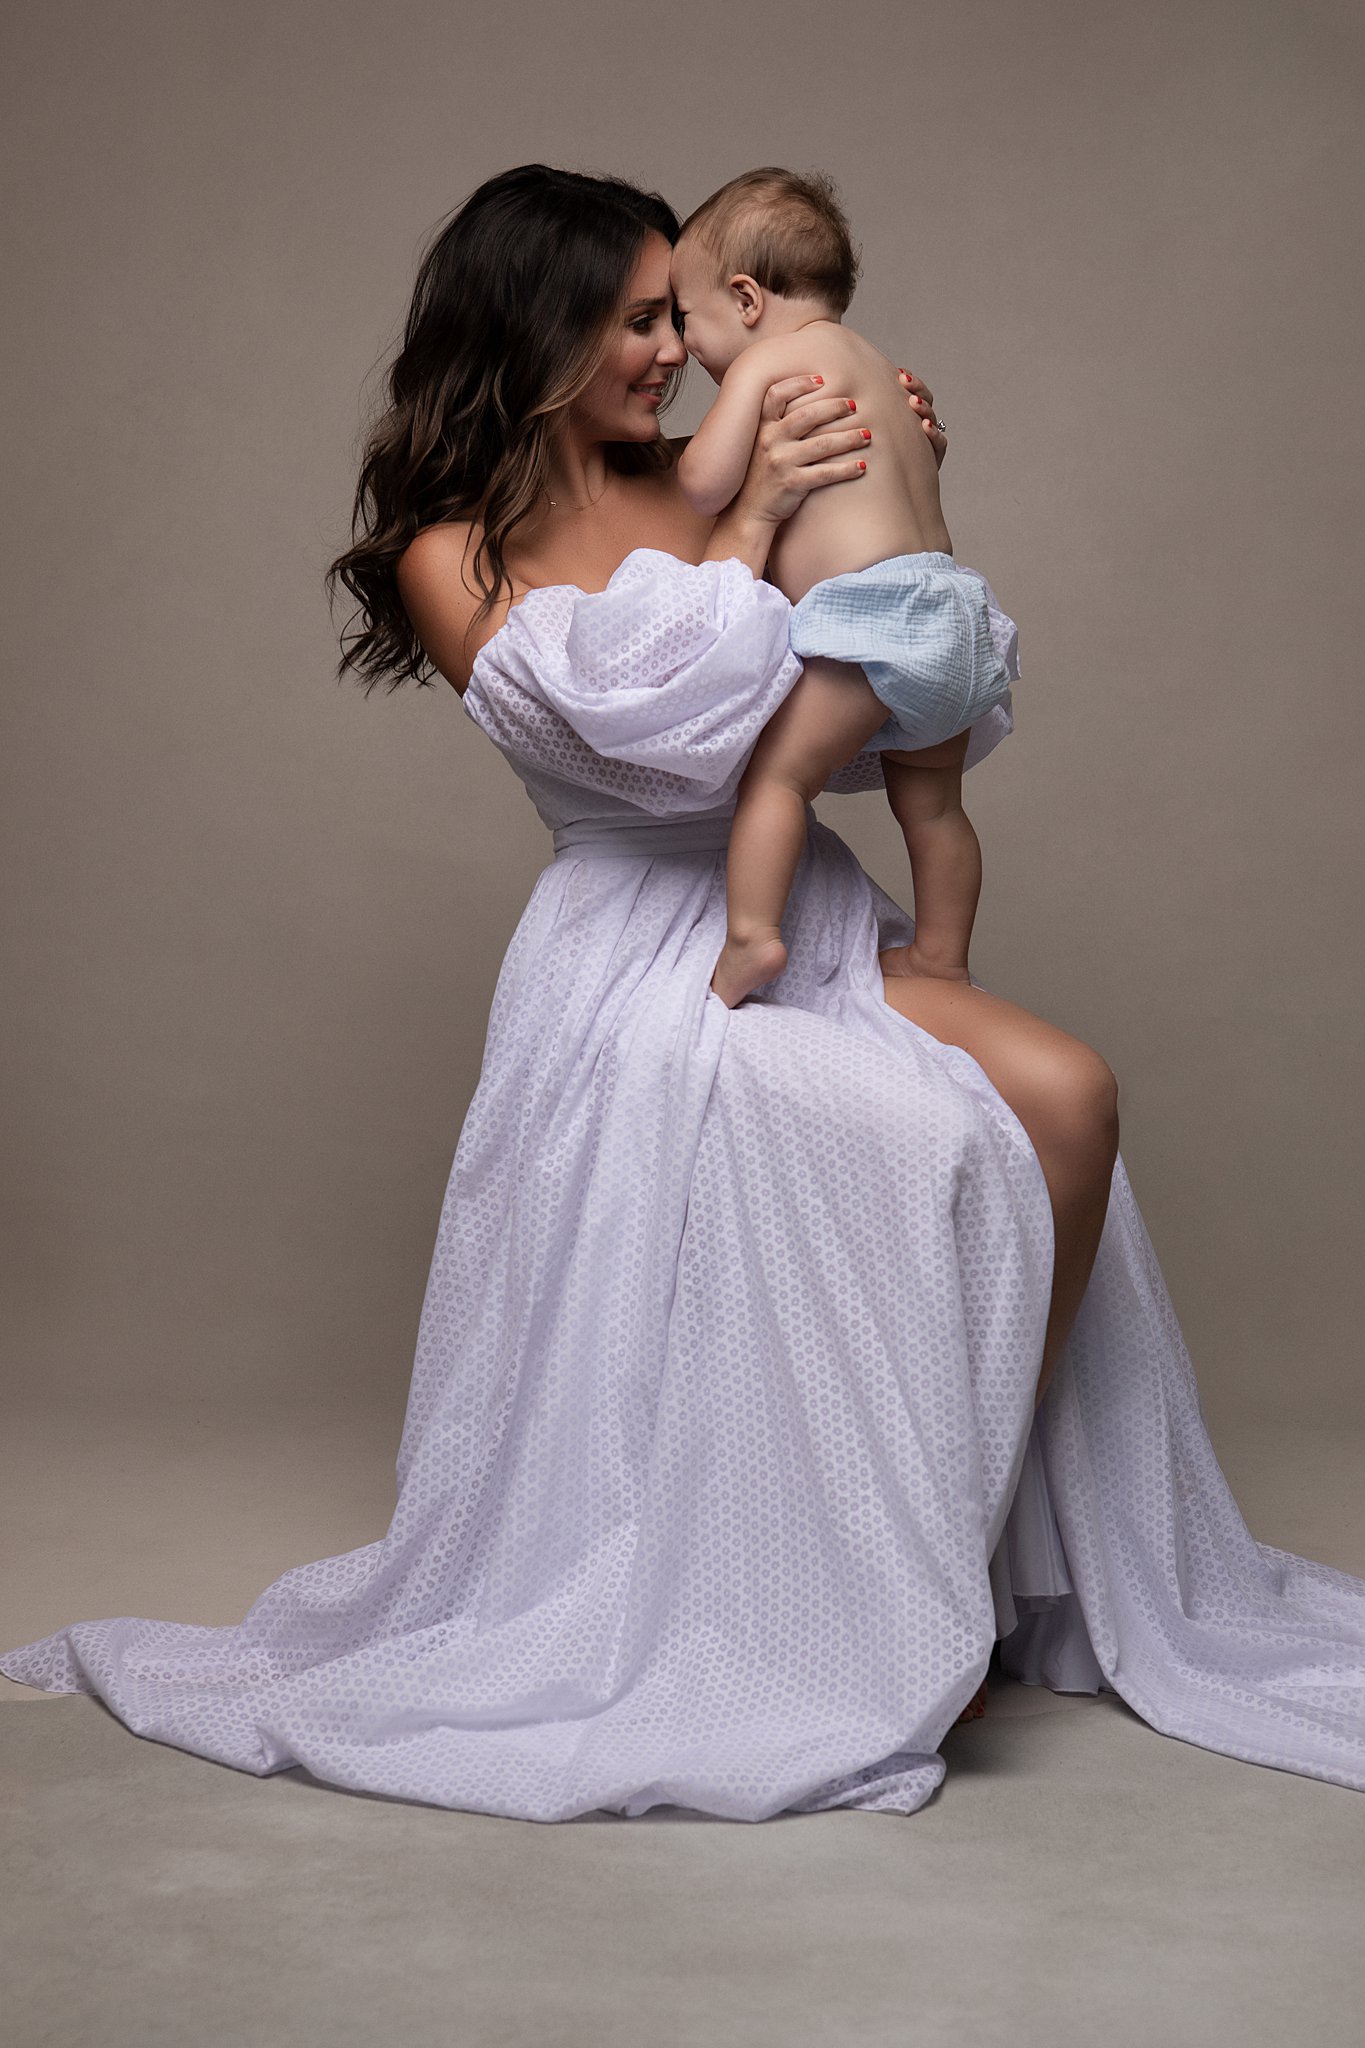 A mother in a lilac dress and long brown hair plays forehead to forehead with her toddler in a studio on a stool Mitylene